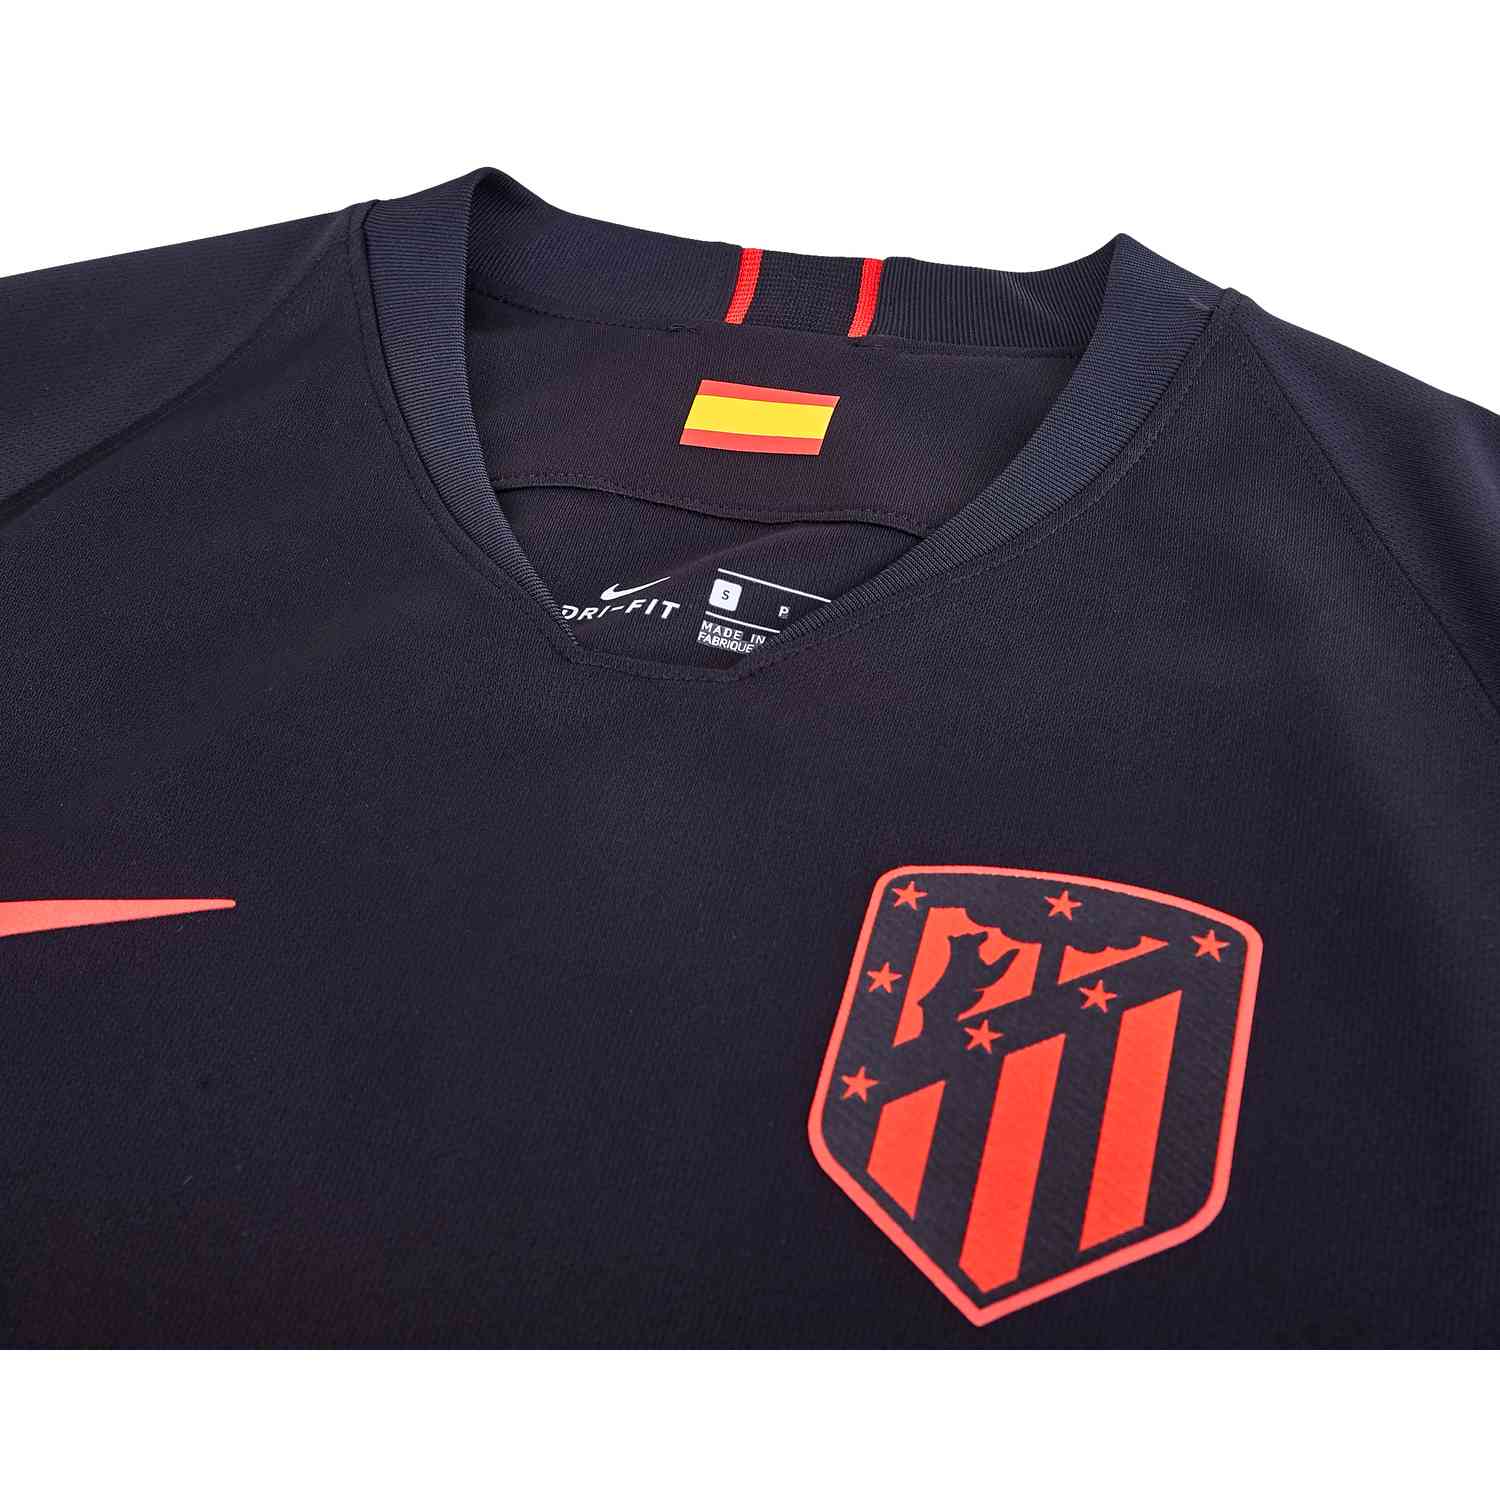 Nike Launch Atletico Madrid 18/19 Away Shirt - SoccerBible